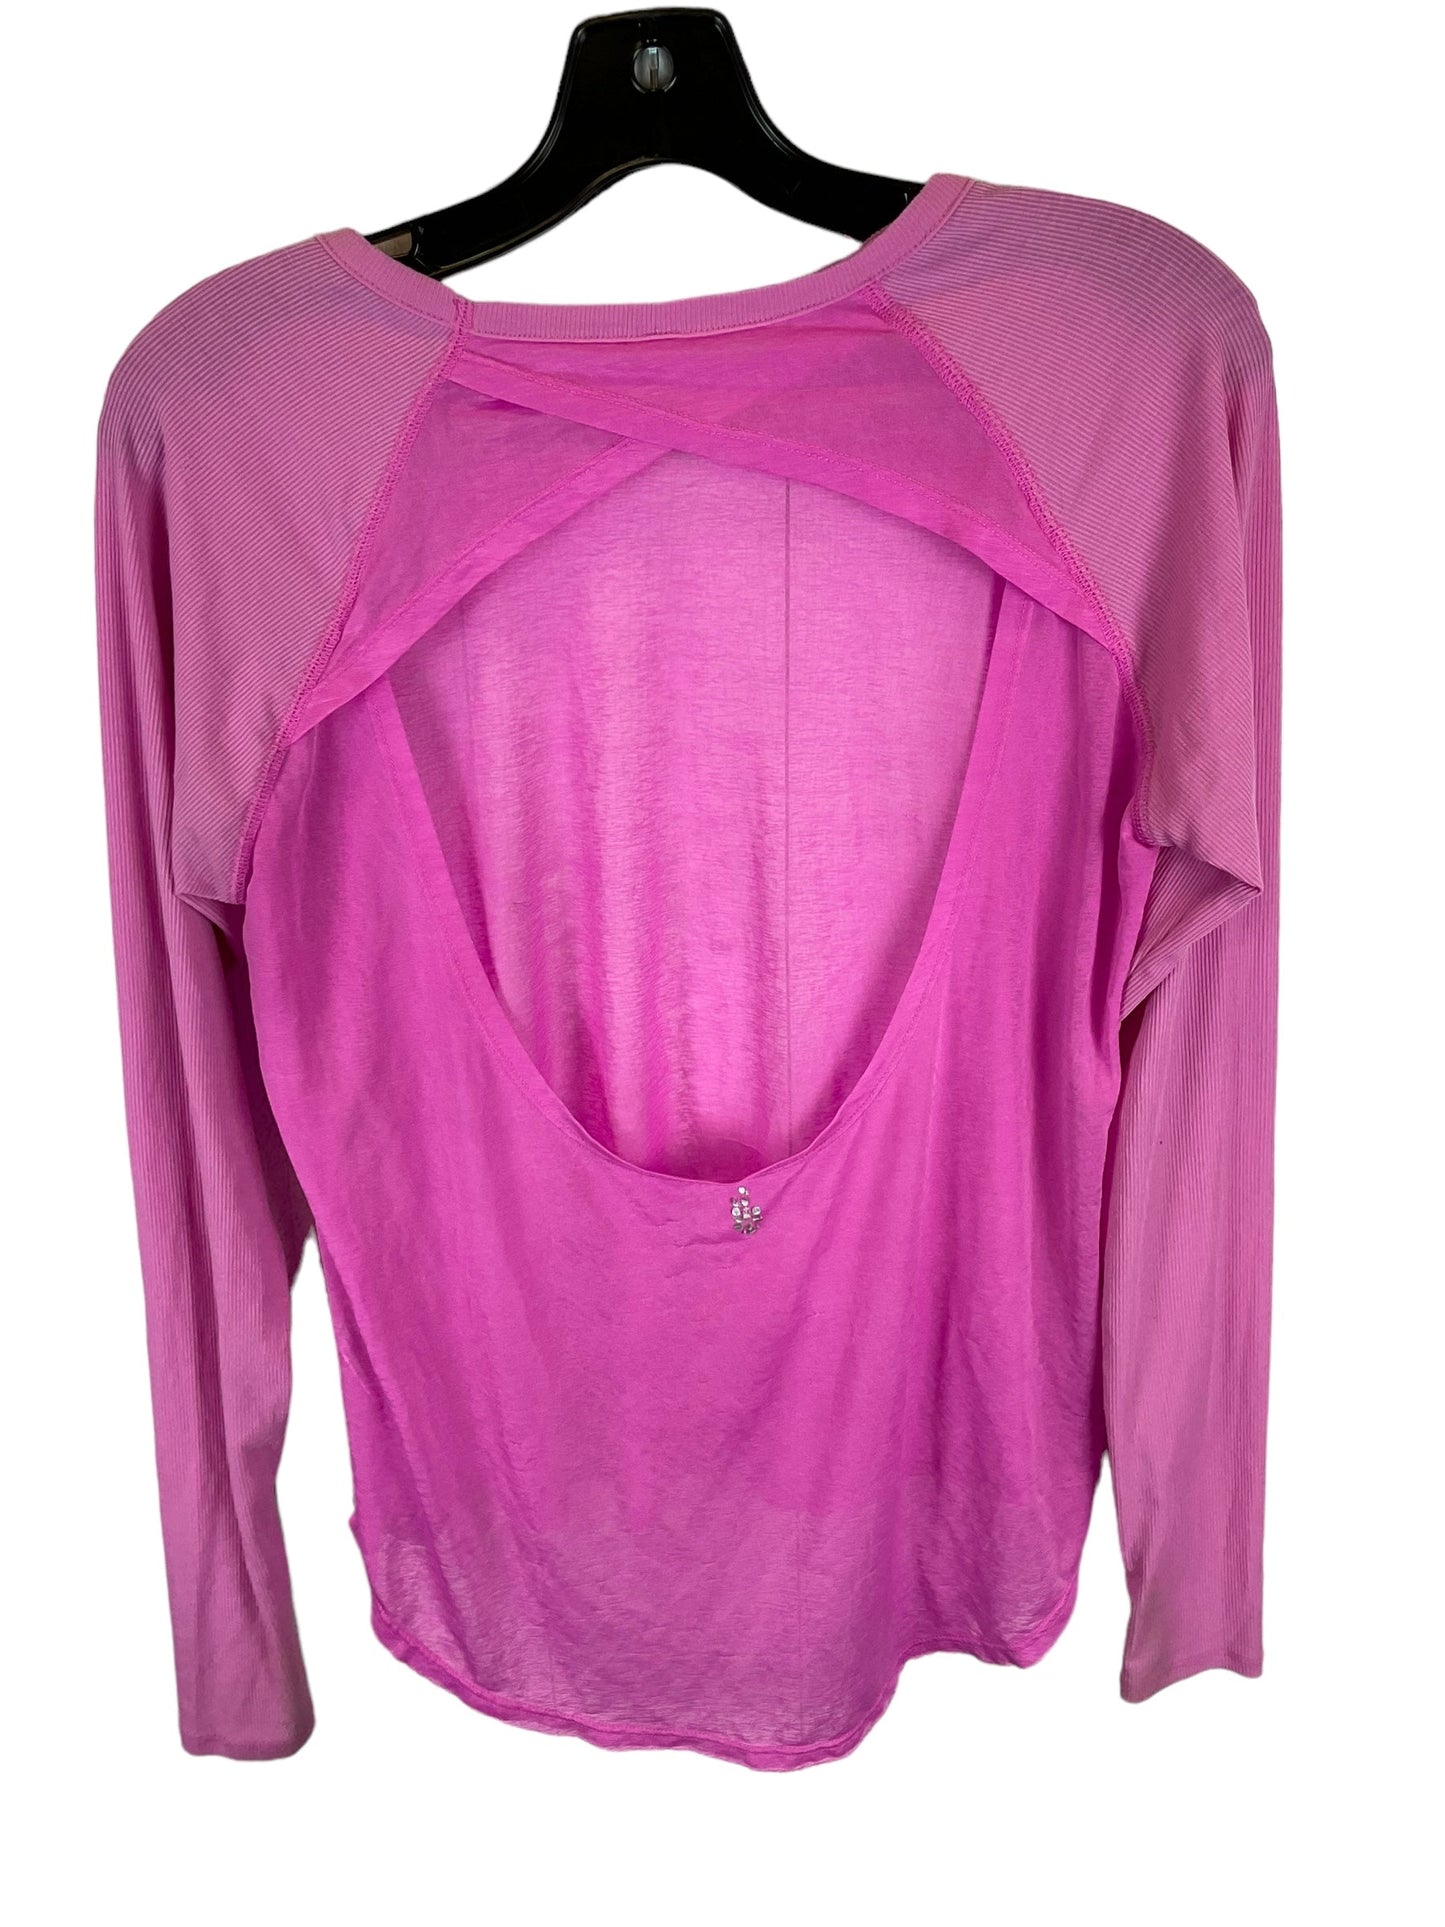 Pink Athletic Top Long Sleeve Crewneck Free People, Size Xs